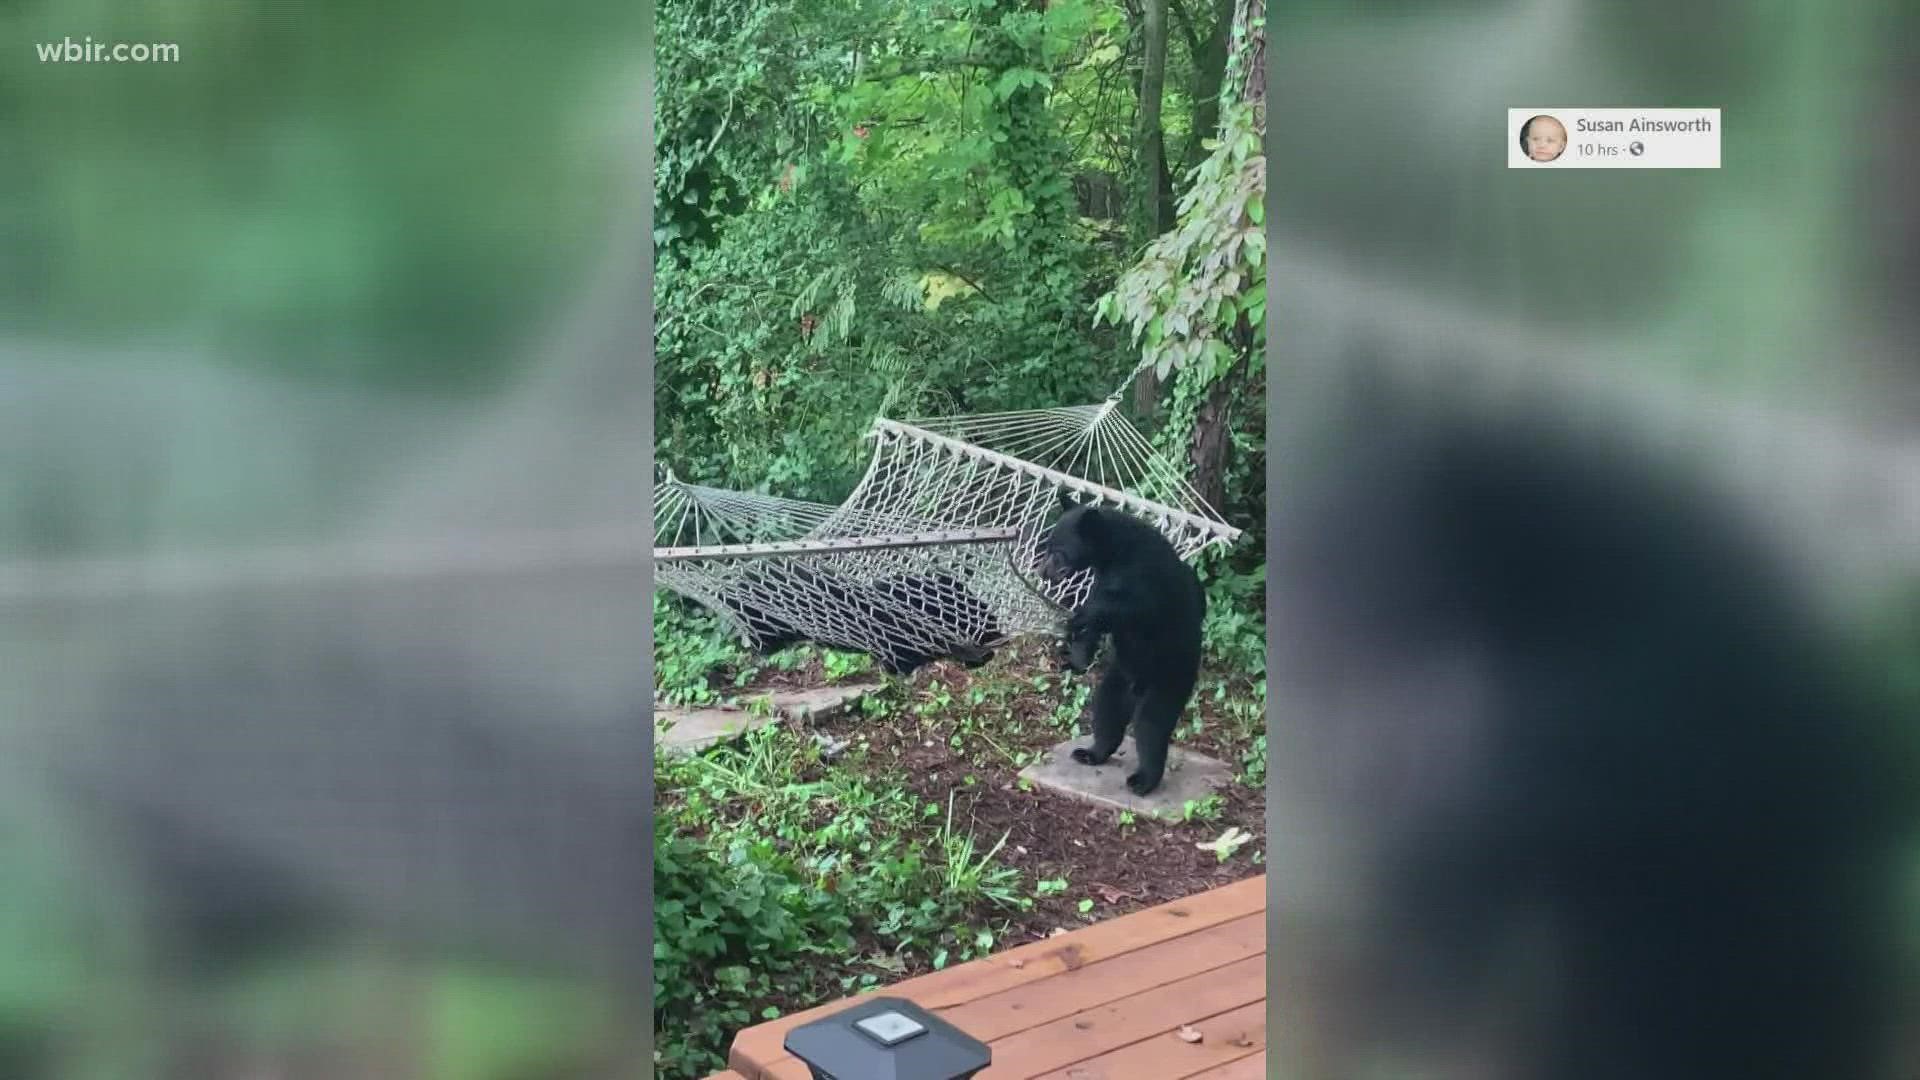 Seems like some rambunctious cubs were having a fun time trying to figure out this hammock in the smokies.